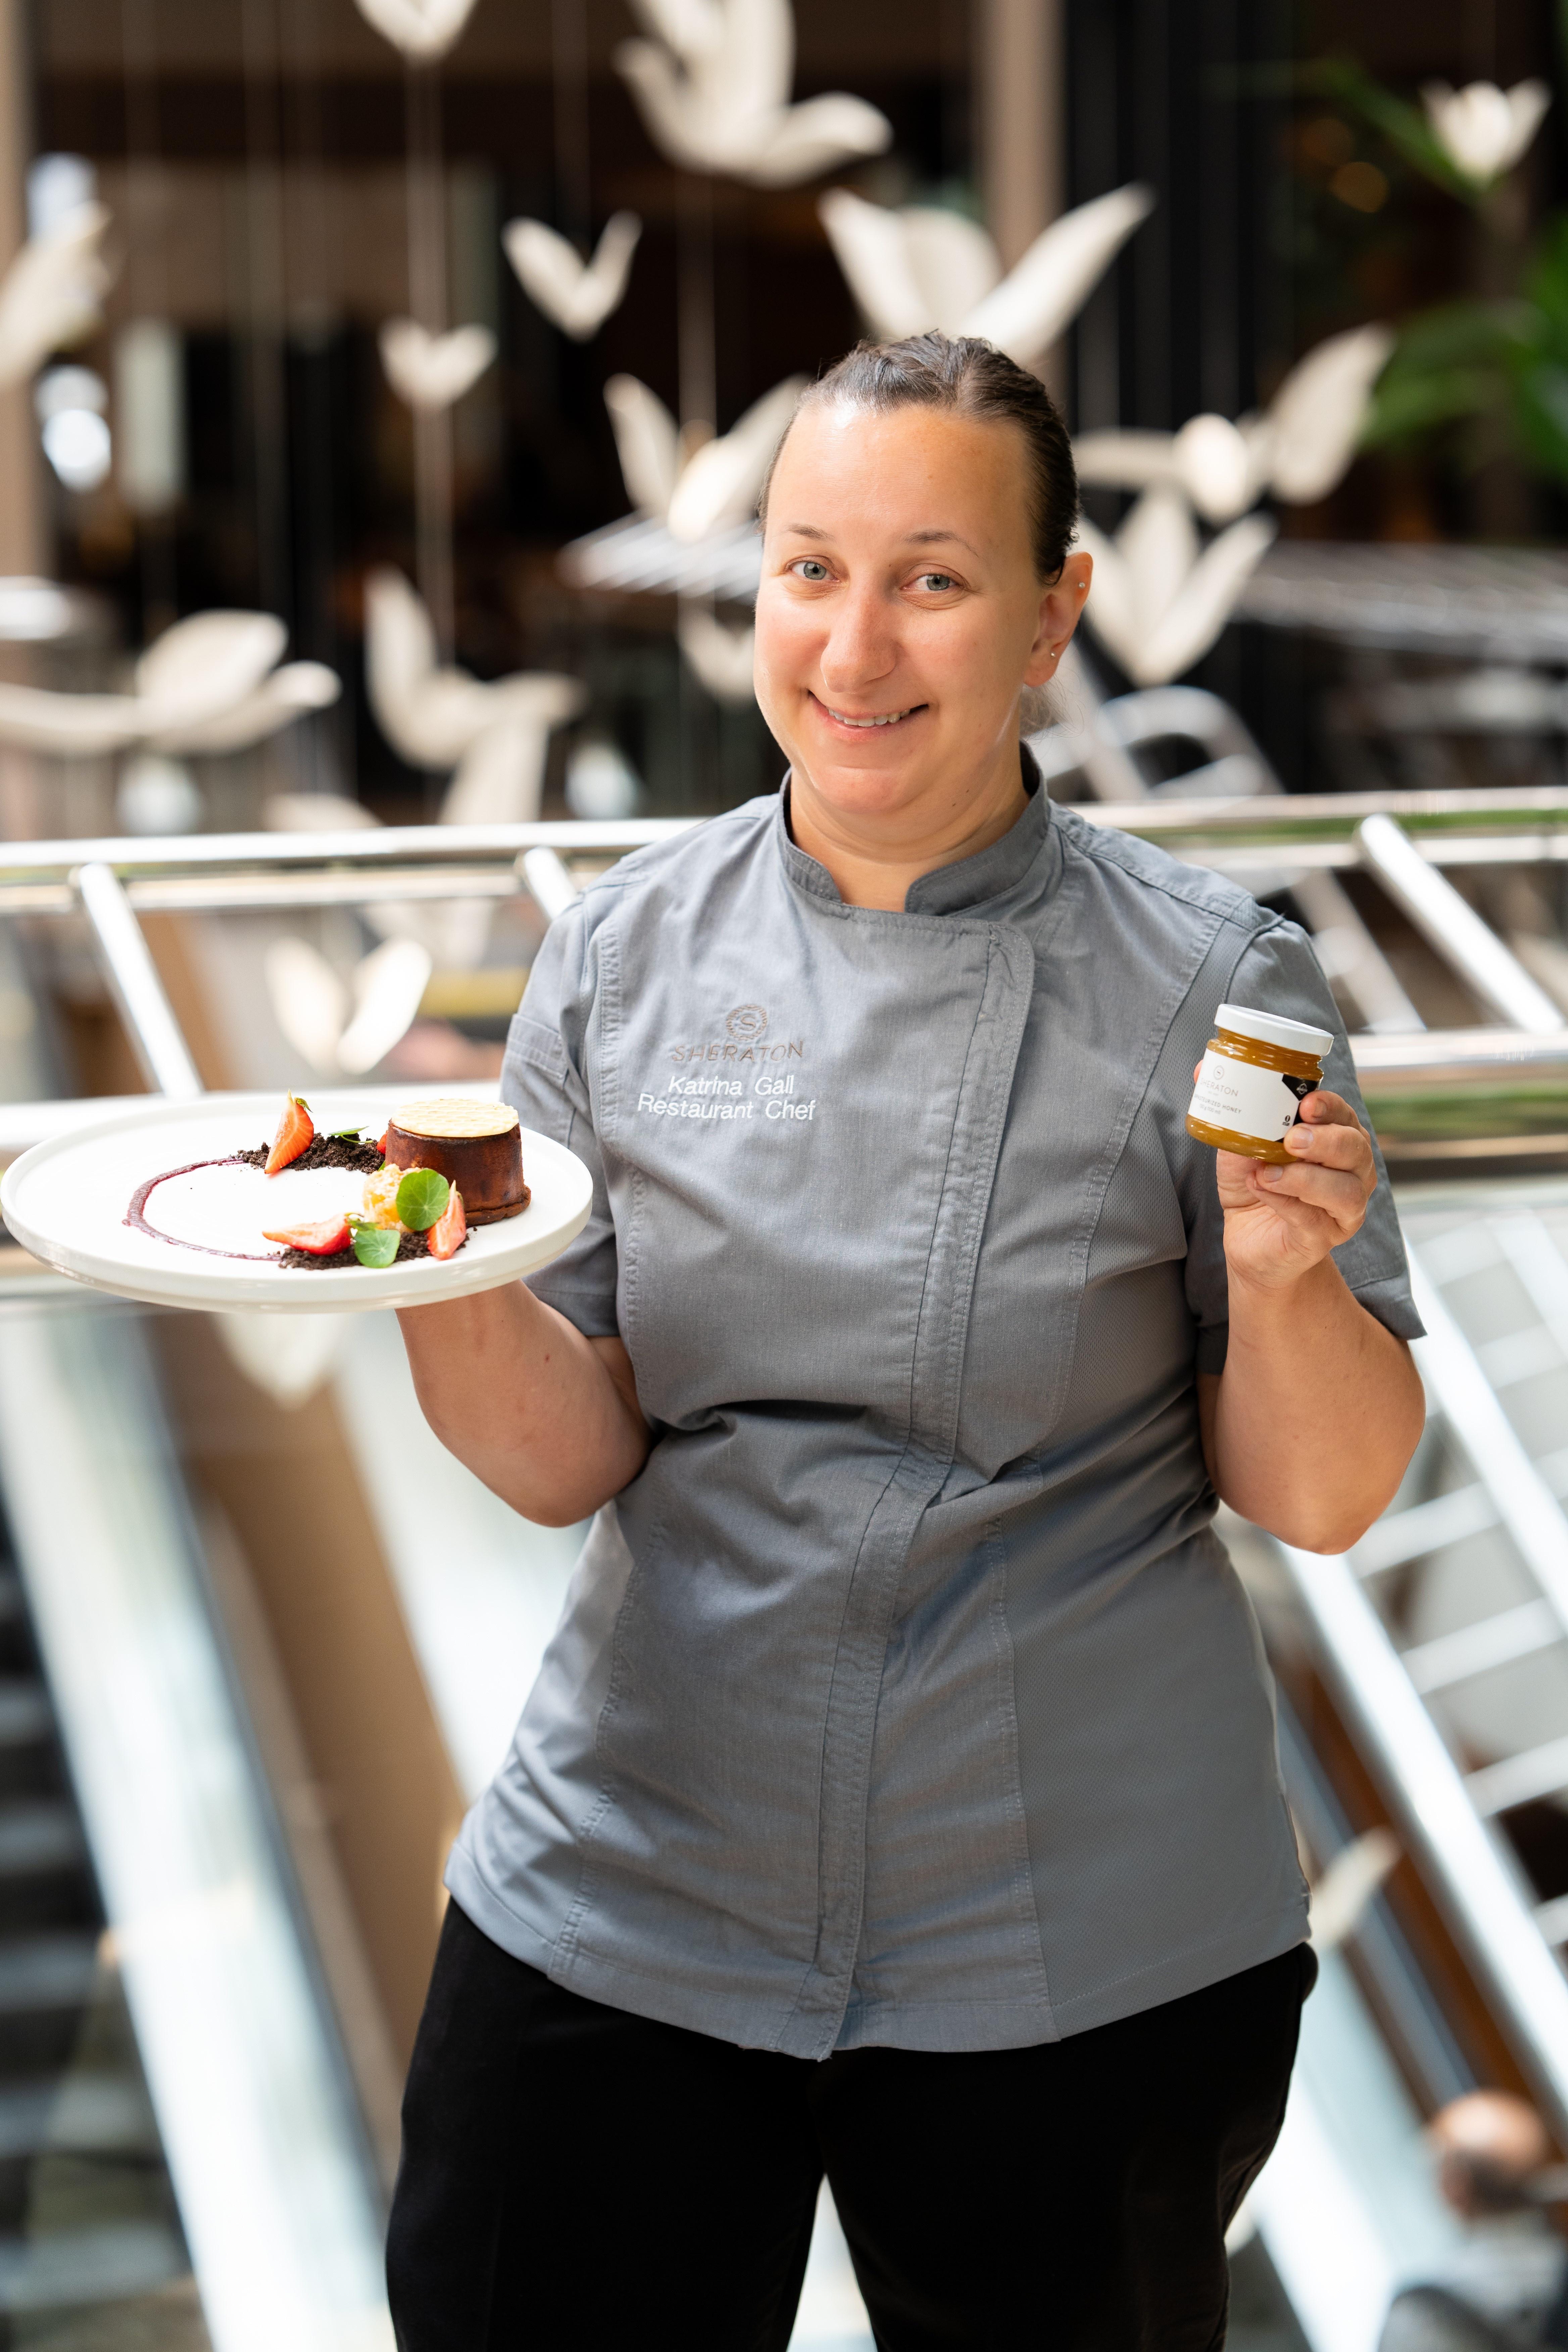 Chef Katrina Gall standing and smiling with a plate of food and a small jar.